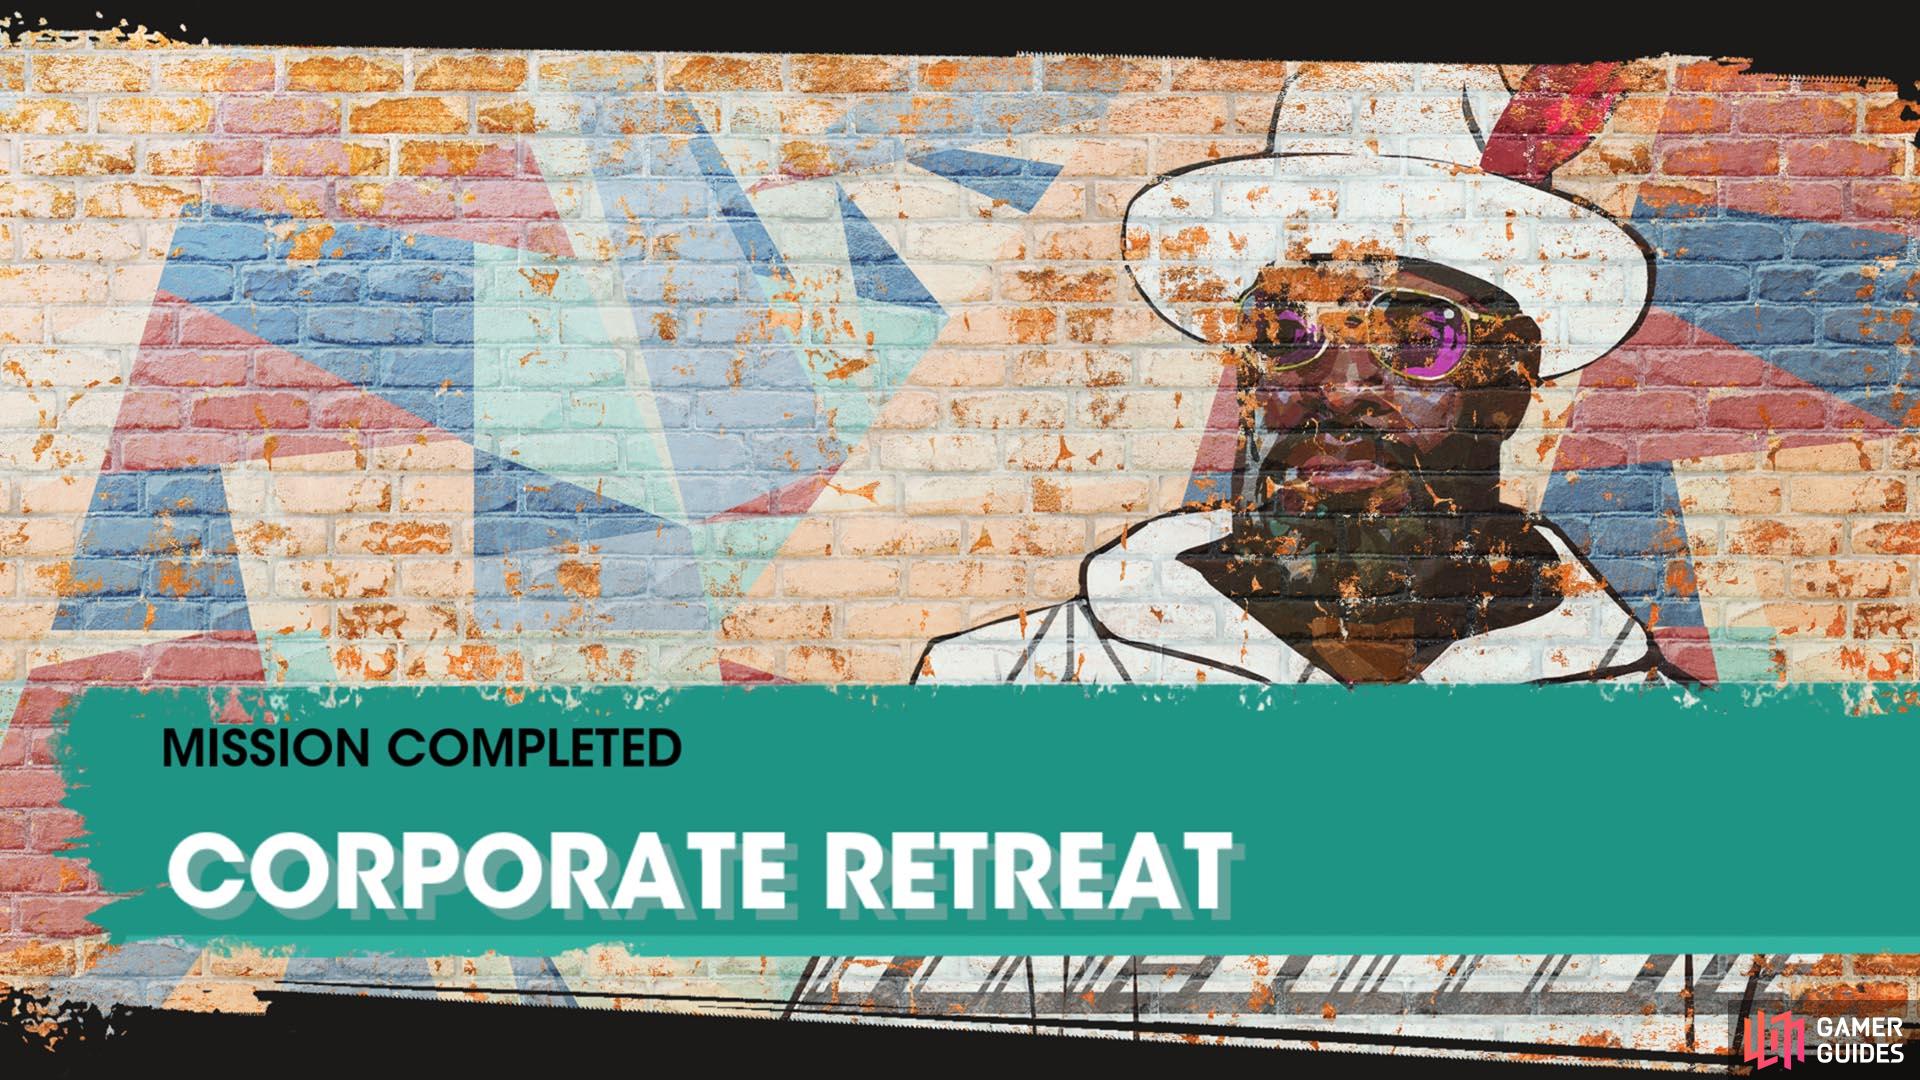 Completing Corporate Retreat will unlock The Nuhualli and add him to your Contacts app.